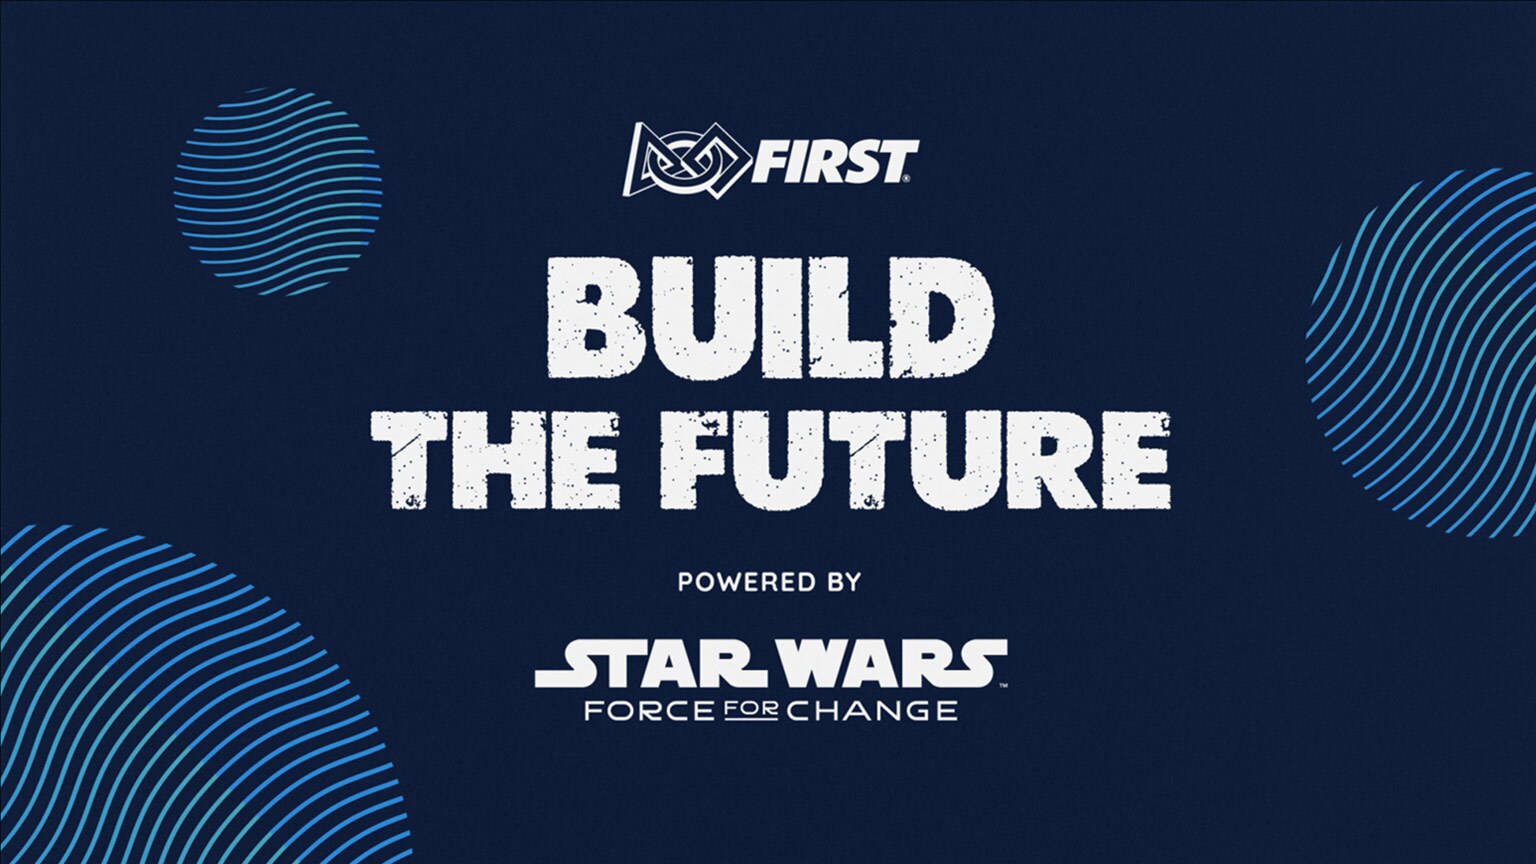 Meet the Teams Building a Better Future with Star Wars: Force for Change